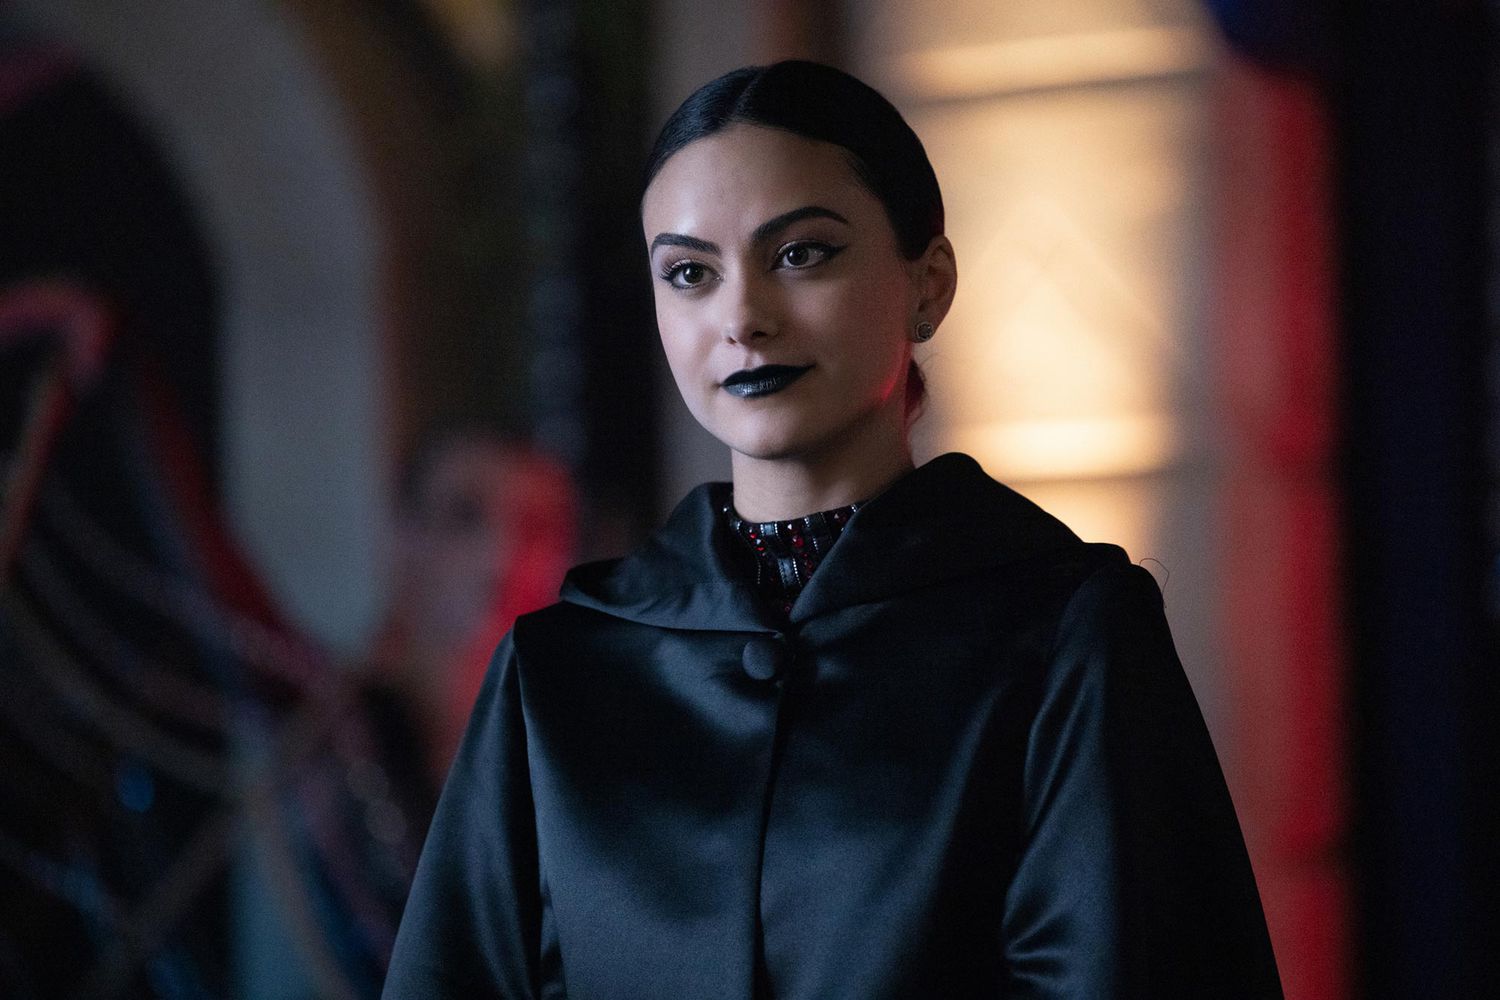 Riverdale -- “Chapter One Hundred and Nine: Venomous” Camila Mendes as Veronica Lodge